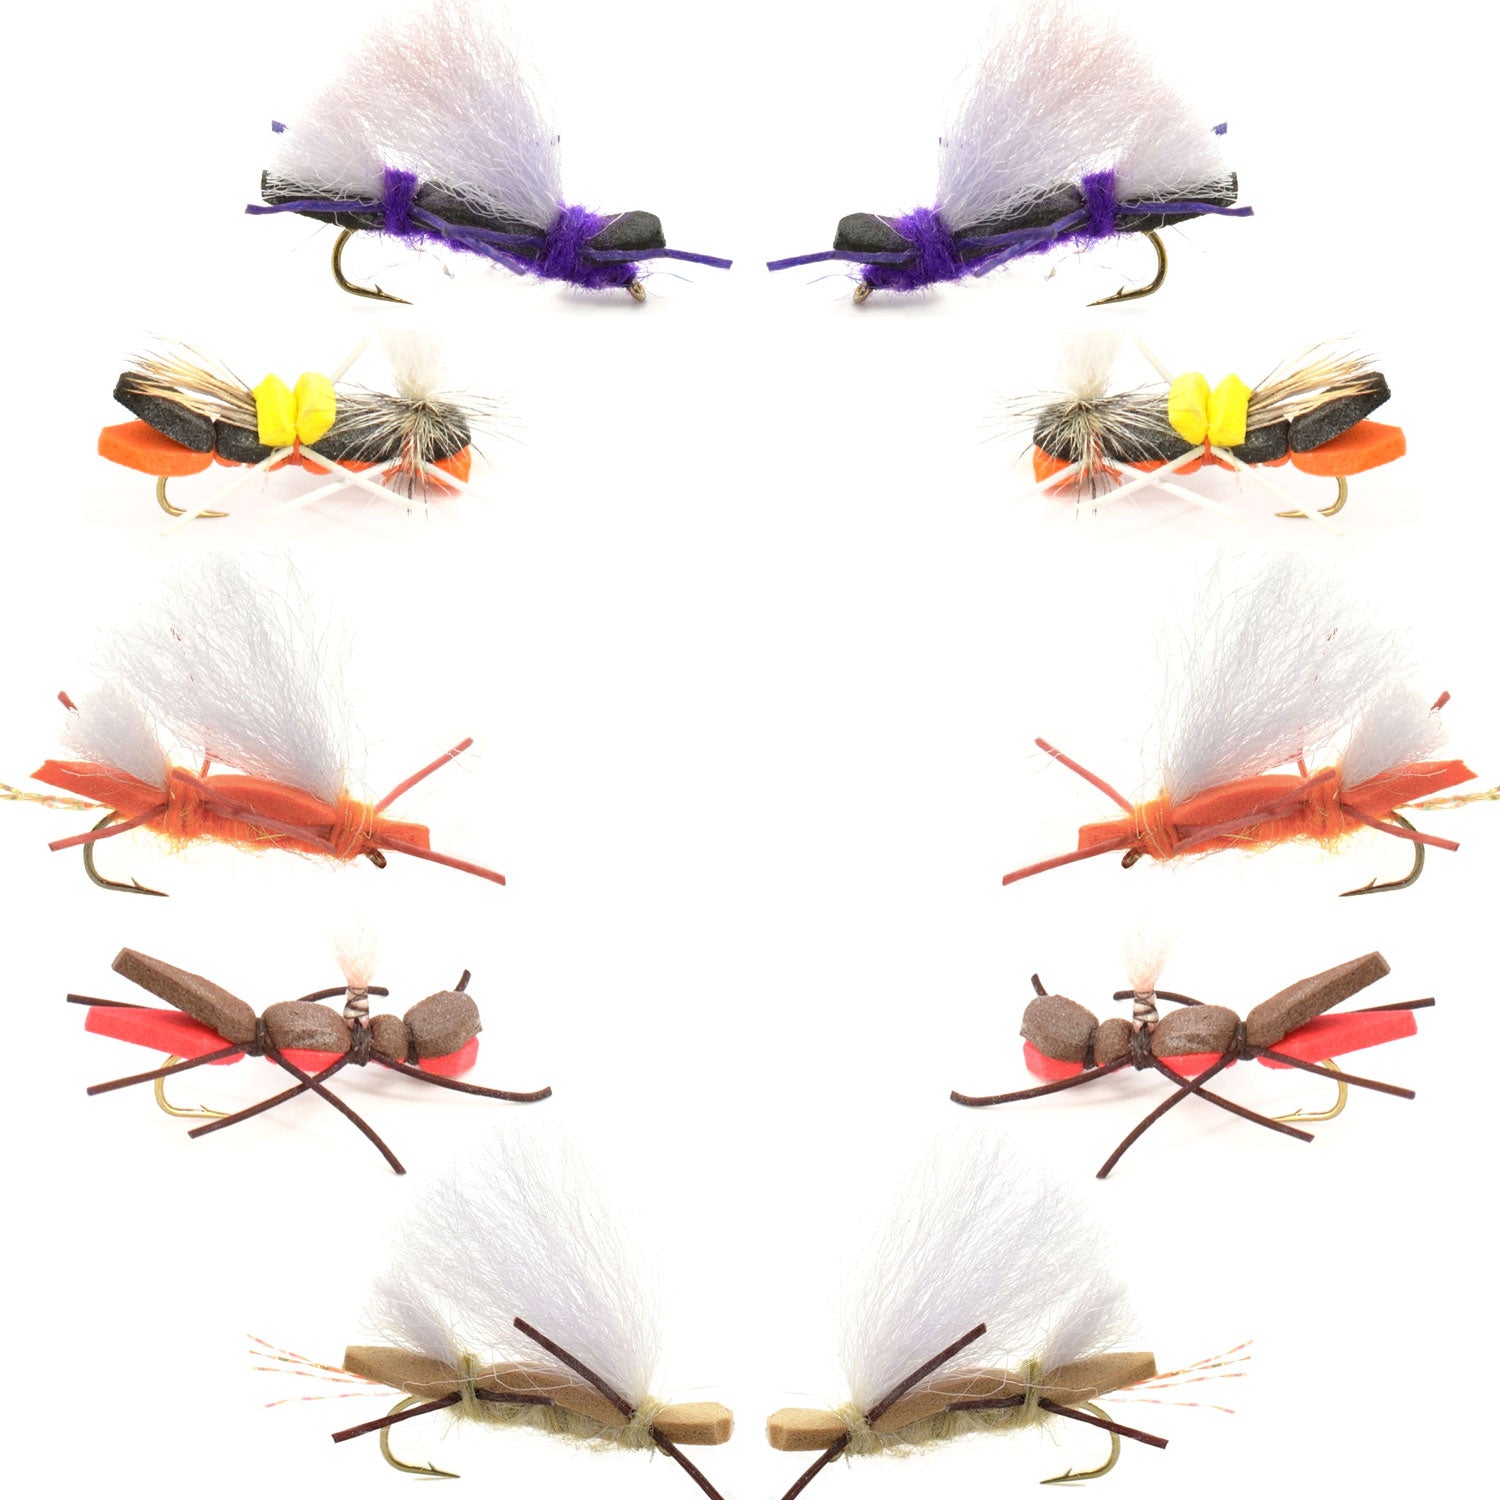 Basics Collection - Chernobyl Ant Foam Dry Fly Assortment - 10 Dry Fis